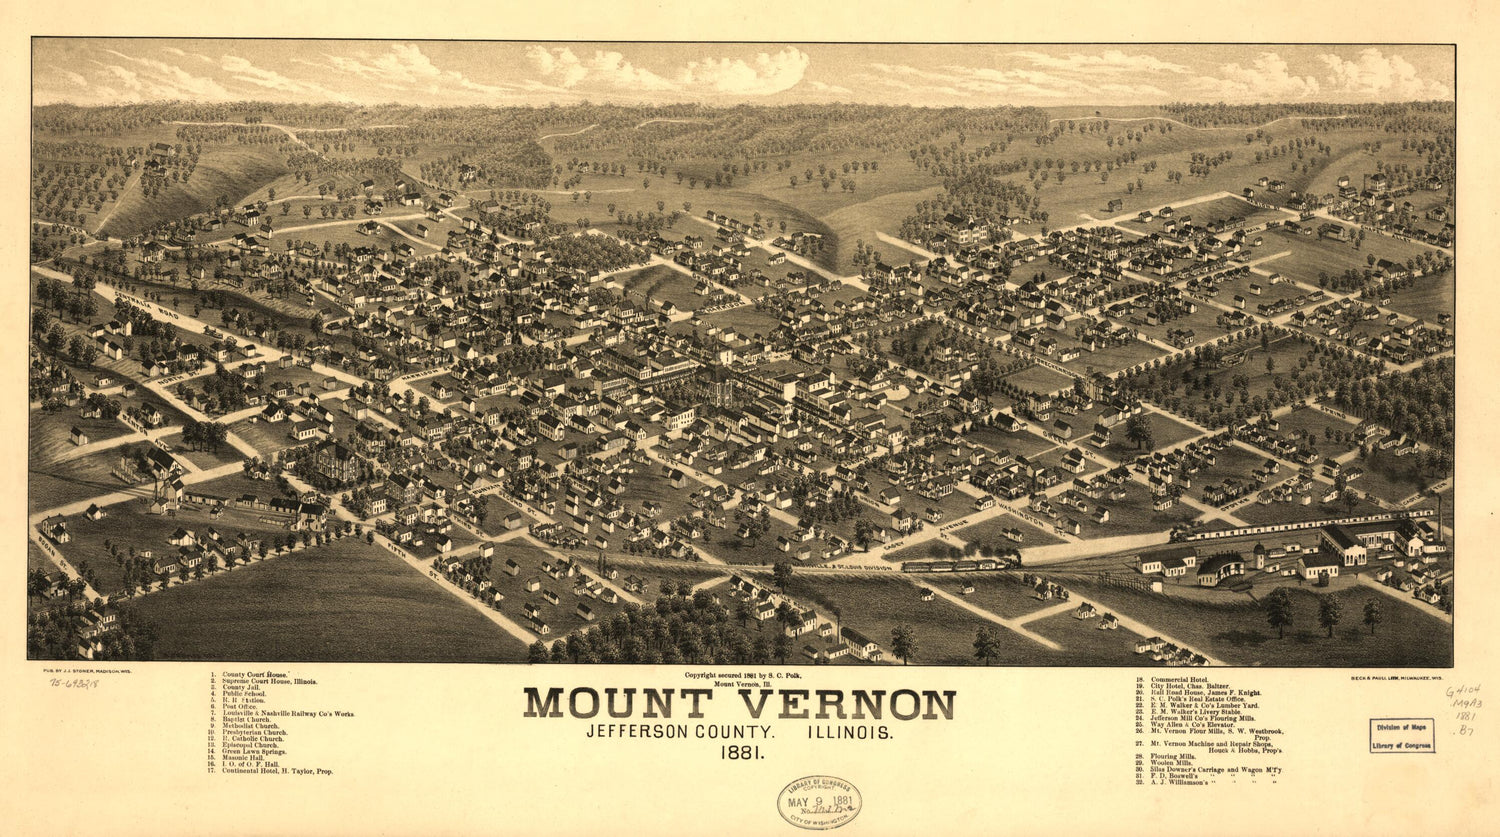 This old map of Mount Vernon, Jefferson County, Illinois from 1881 was created by  Beck &amp; Pauli, H. Brosius, S. C. Polk, J. J. Stoner in 1881